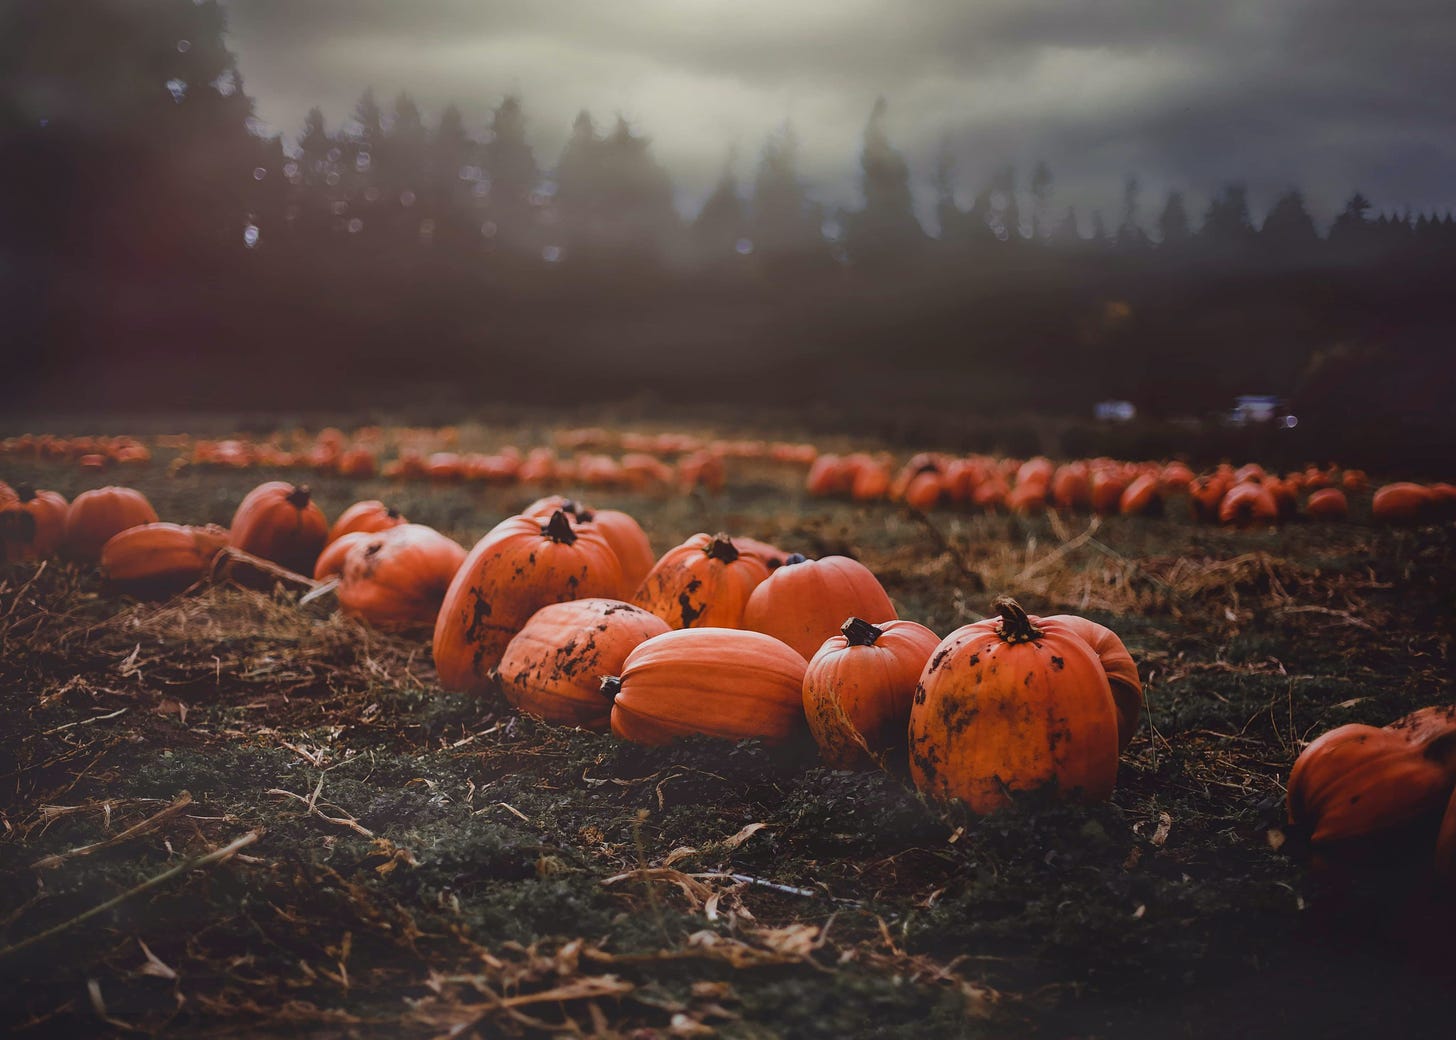 moody picture of pumpkins ready to be harvested from the field